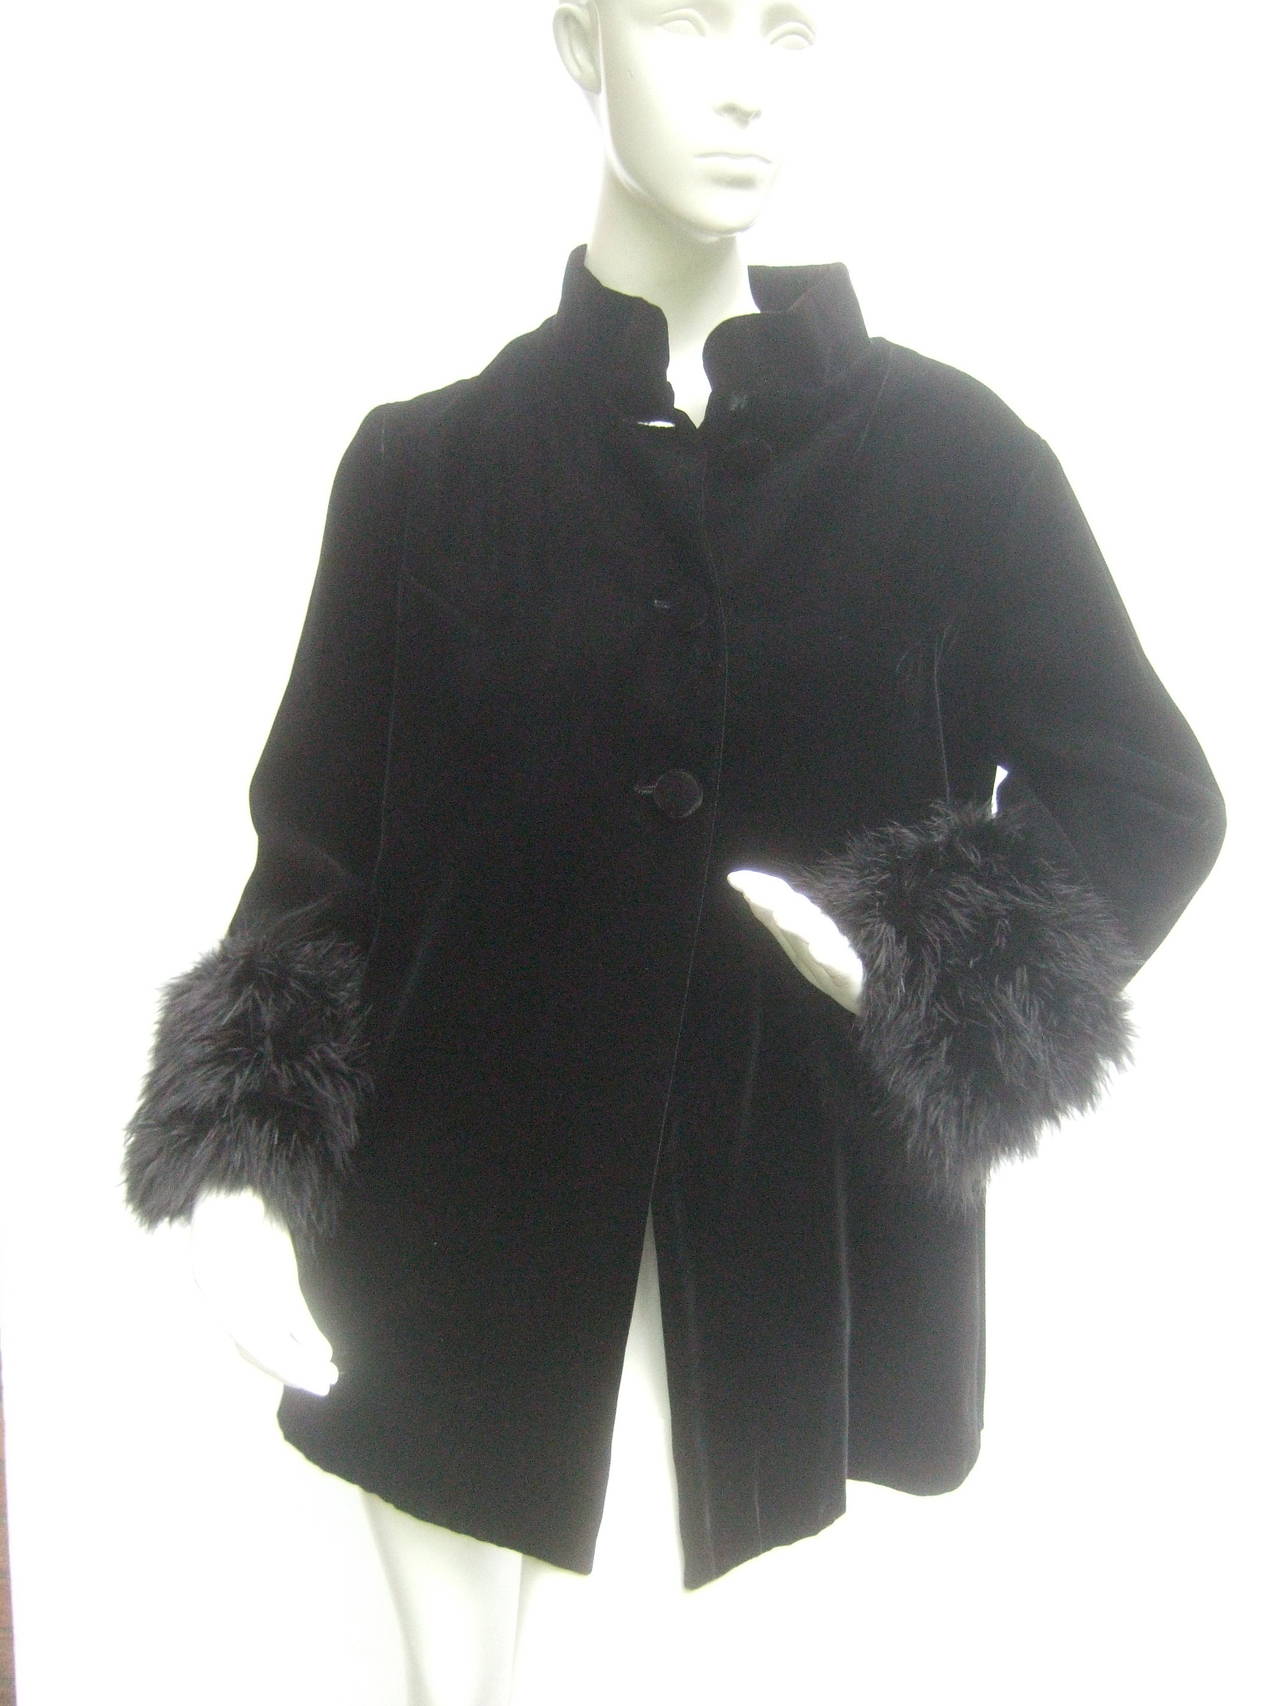 Black velvet marabou cuff mandrian collar jacket c 1970s 
The stylish cotton velvet jacket is embellished
with wide black fluffy marabou feather cuffs

The jacket secures with three matching black
velvet buttons on the bodice. The velvet